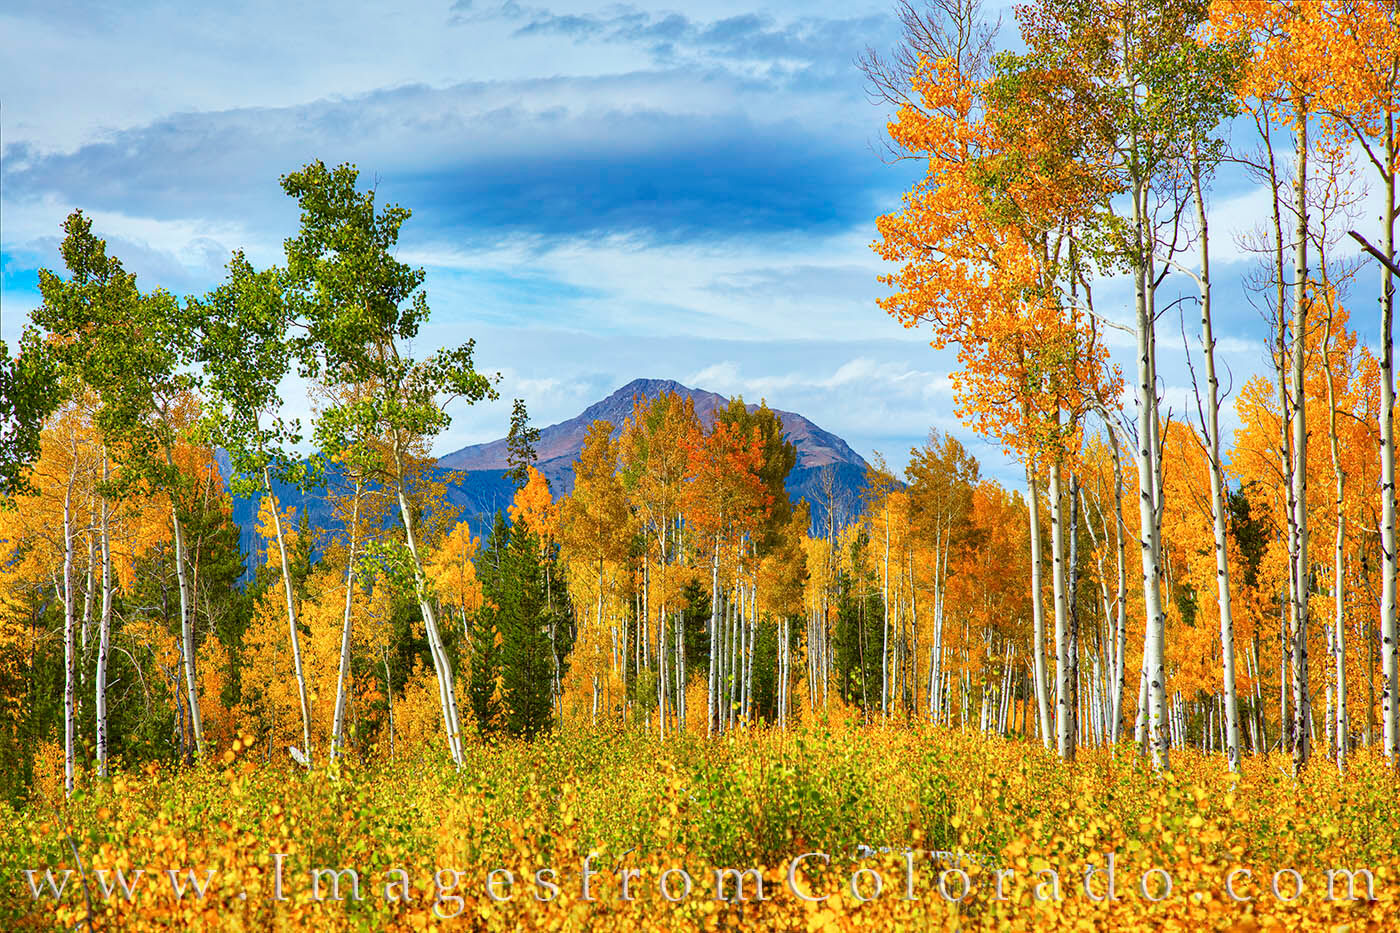 Autumn aspen show their colors on a cool, late september morning as Byers Peak looms in the distance. Not far from Fraser and...